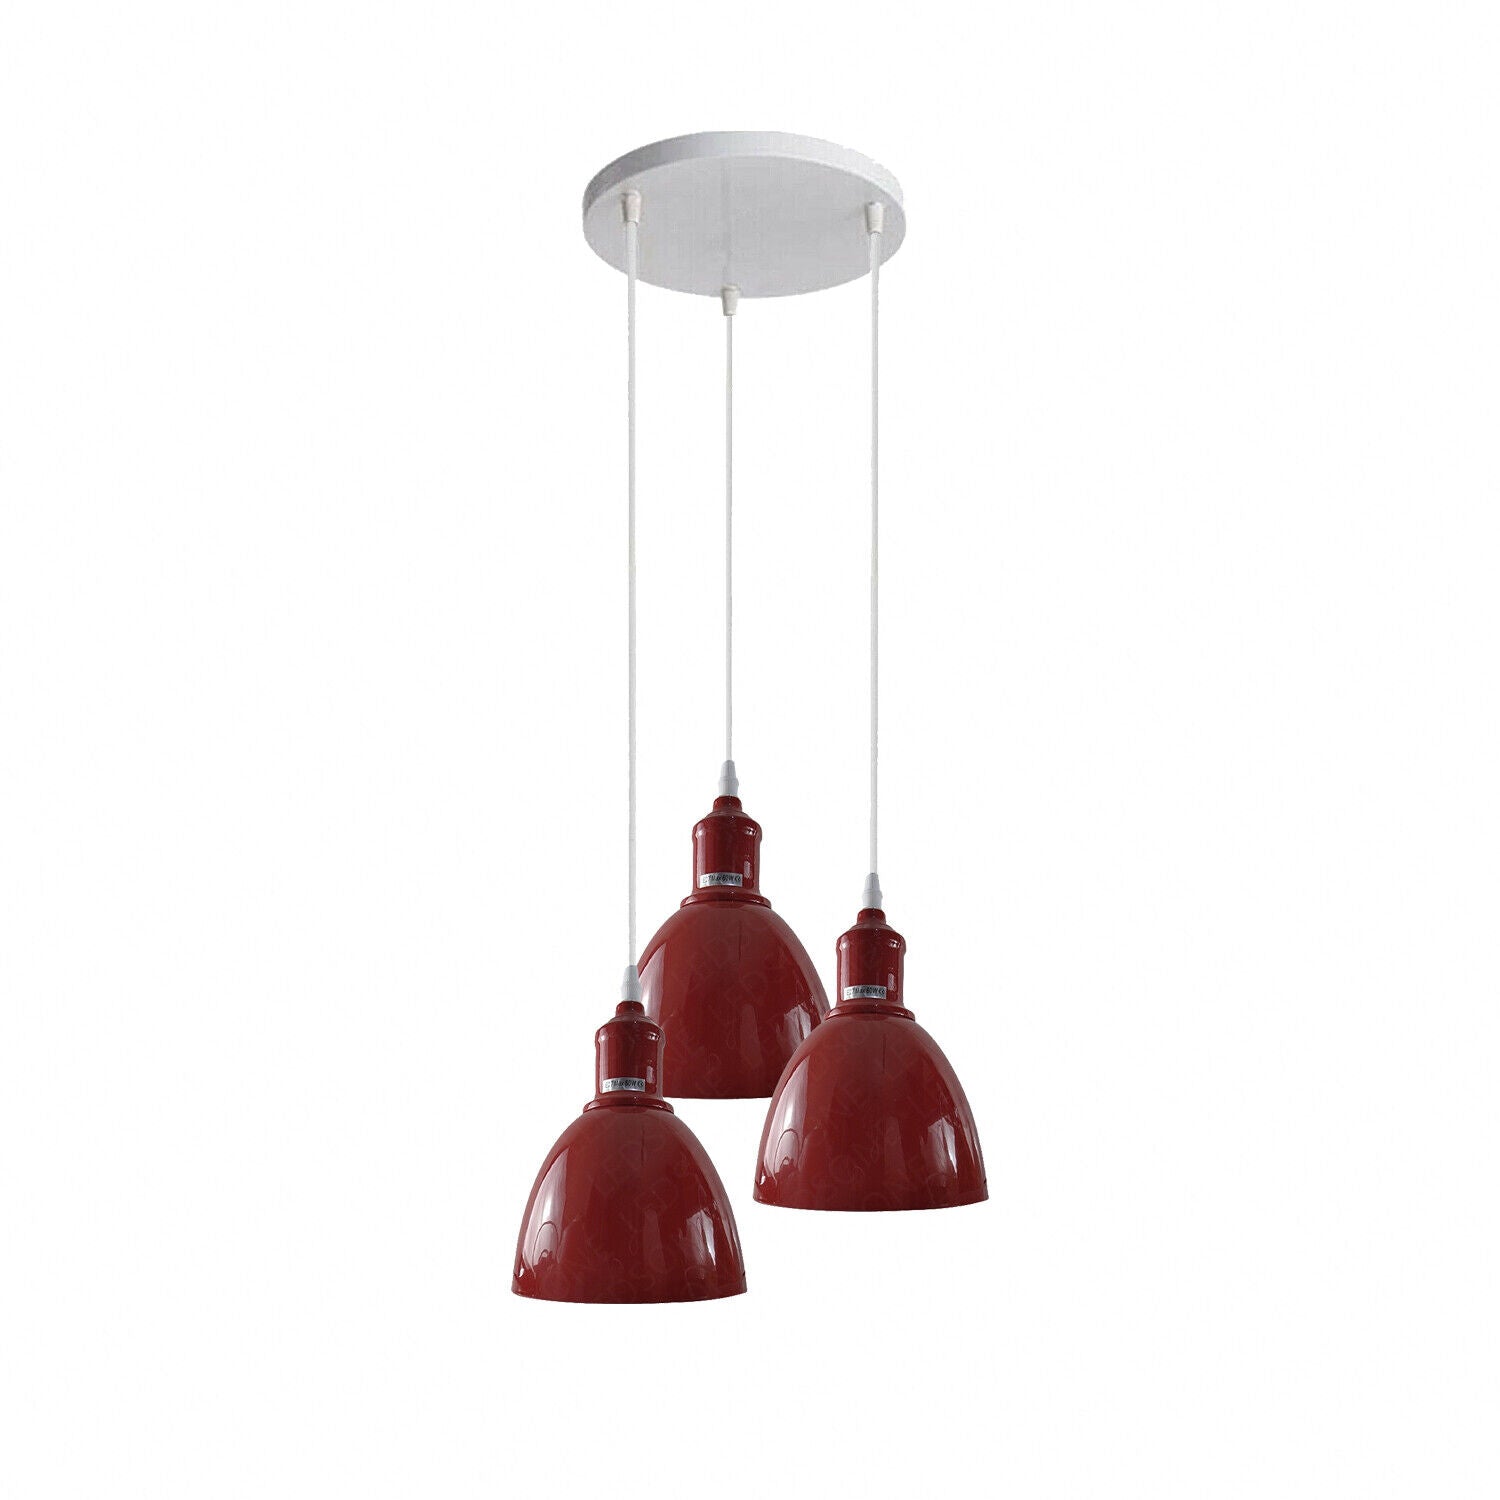 Retro Industrial Ceiling Lighting 3-way cluster Ceiling Pendant Light with E27 Base, Modern Ceiling Lighting Shade for Bedroom kitchen island Hallway Office Coffee Shop.